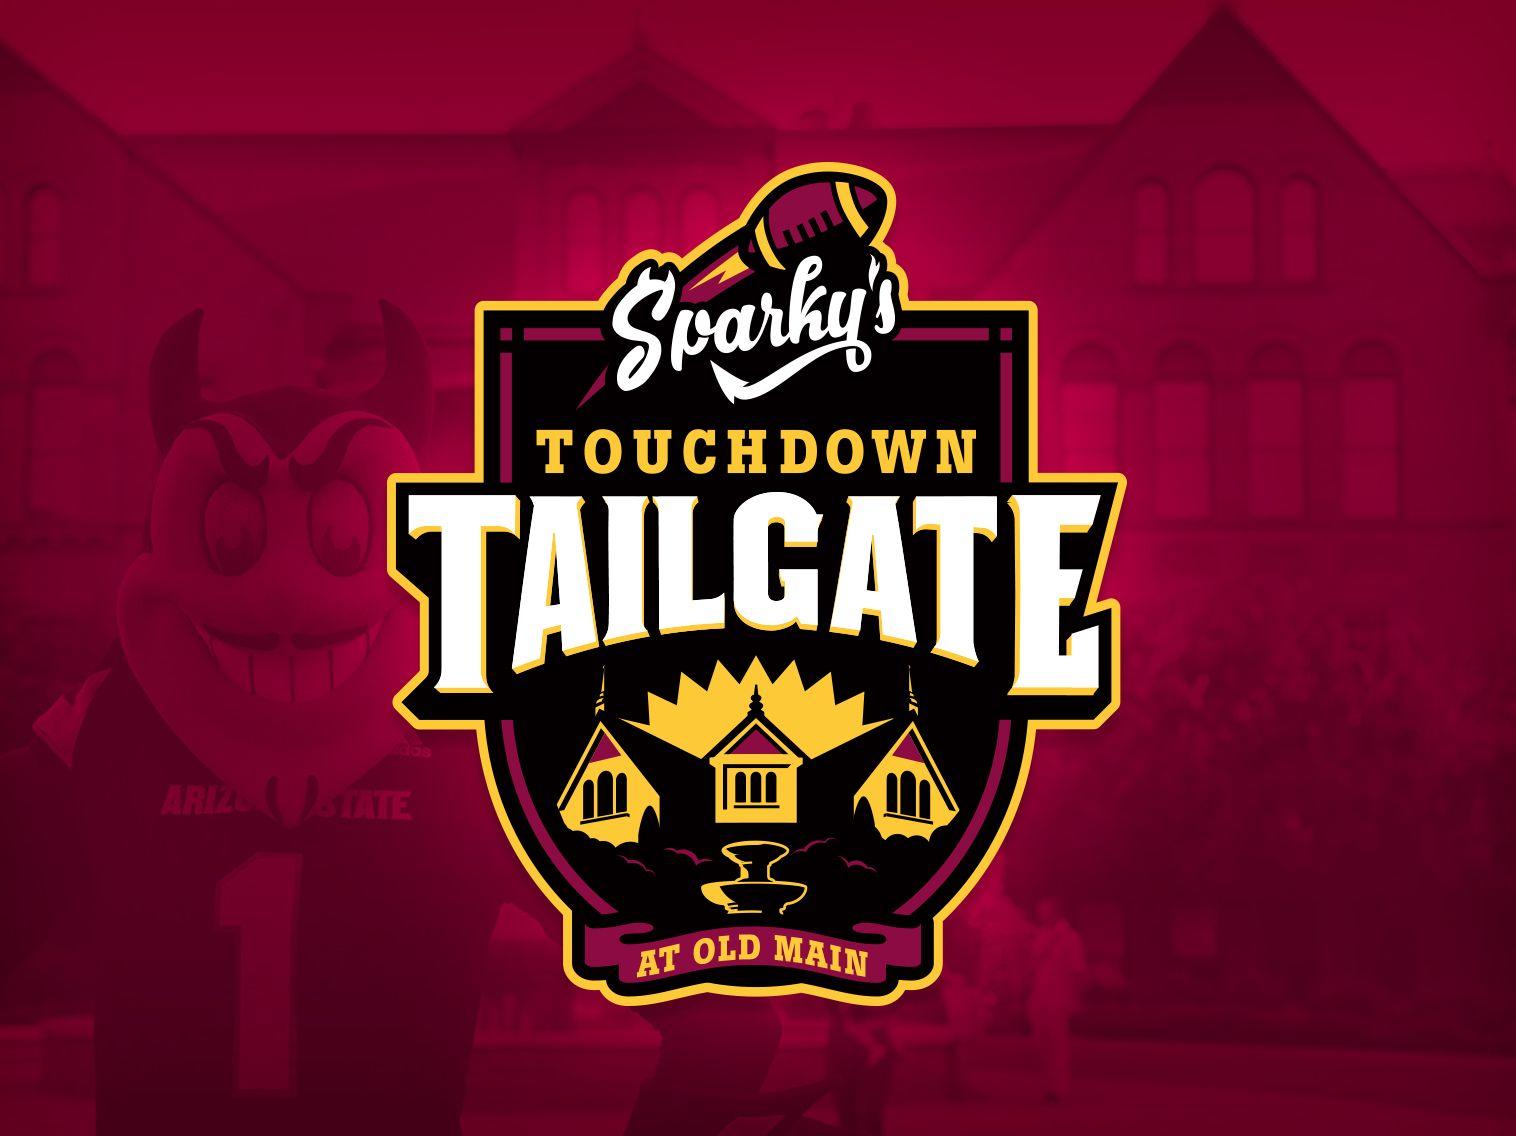 Asu Old Logo - Sparky's Touchdown Tailgate at Old Main by Boyd Erickson. Dribbble